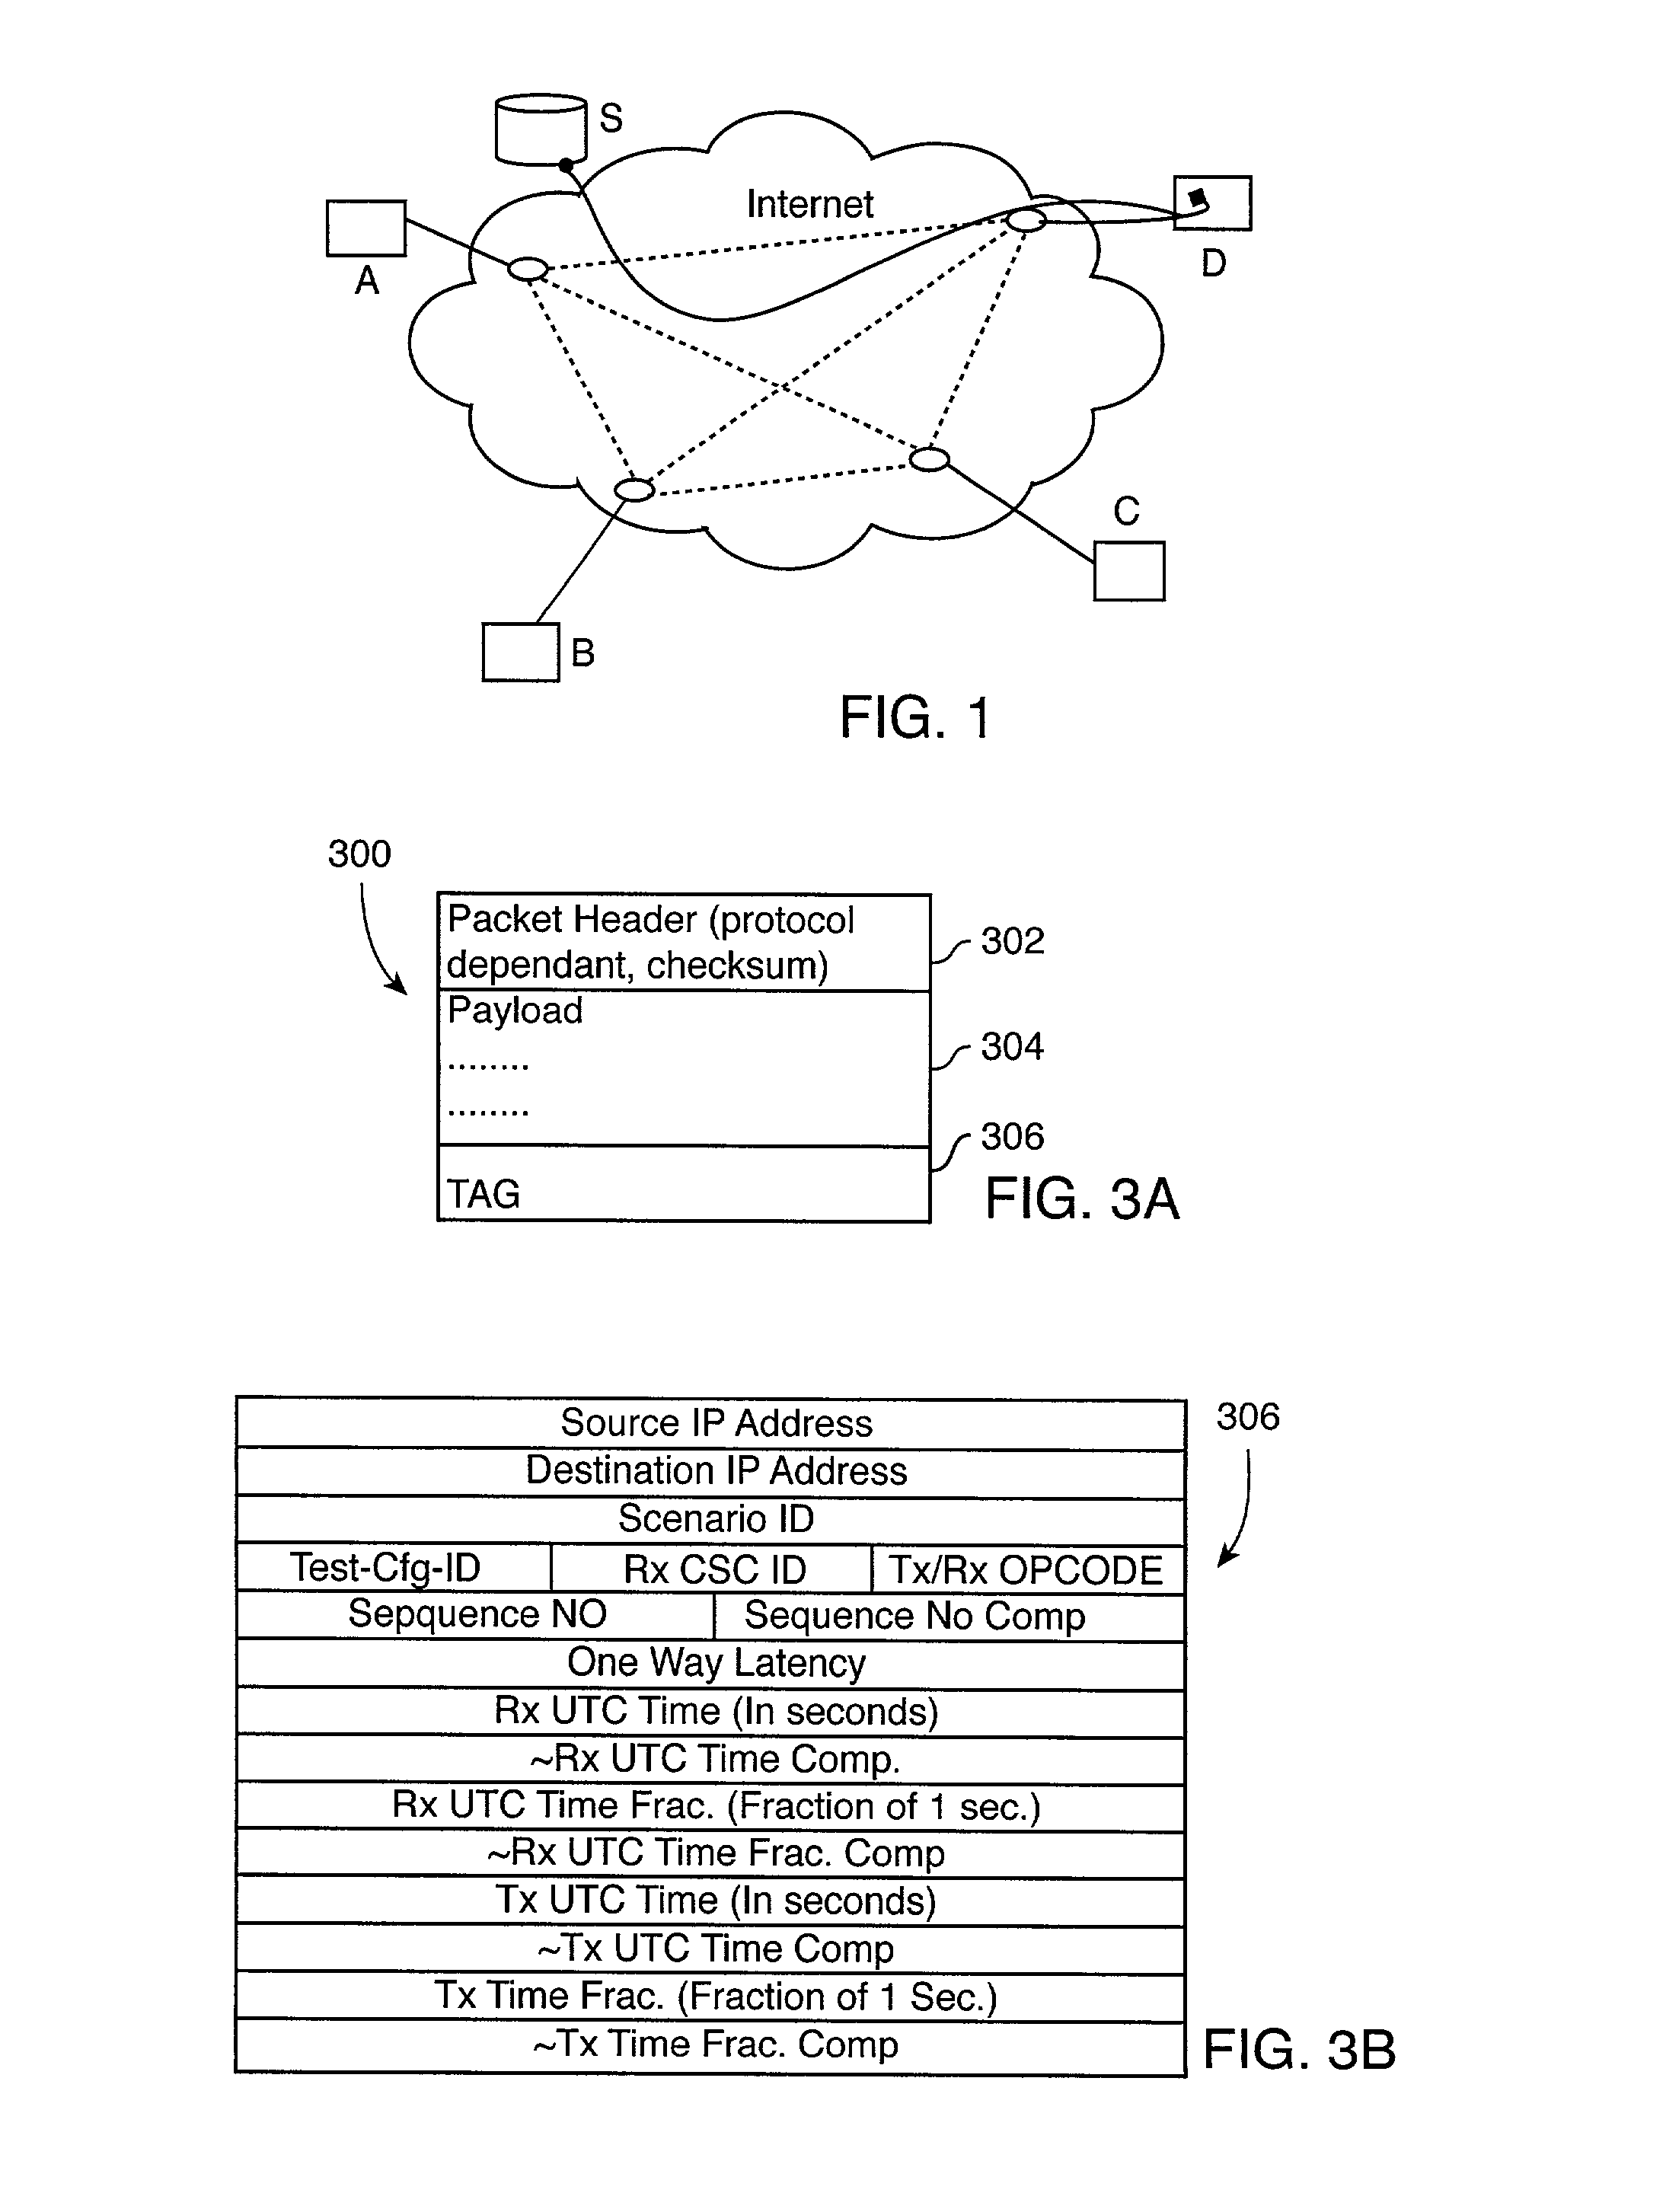 Method for creating accurate time-stamped frames sent between computers via a network